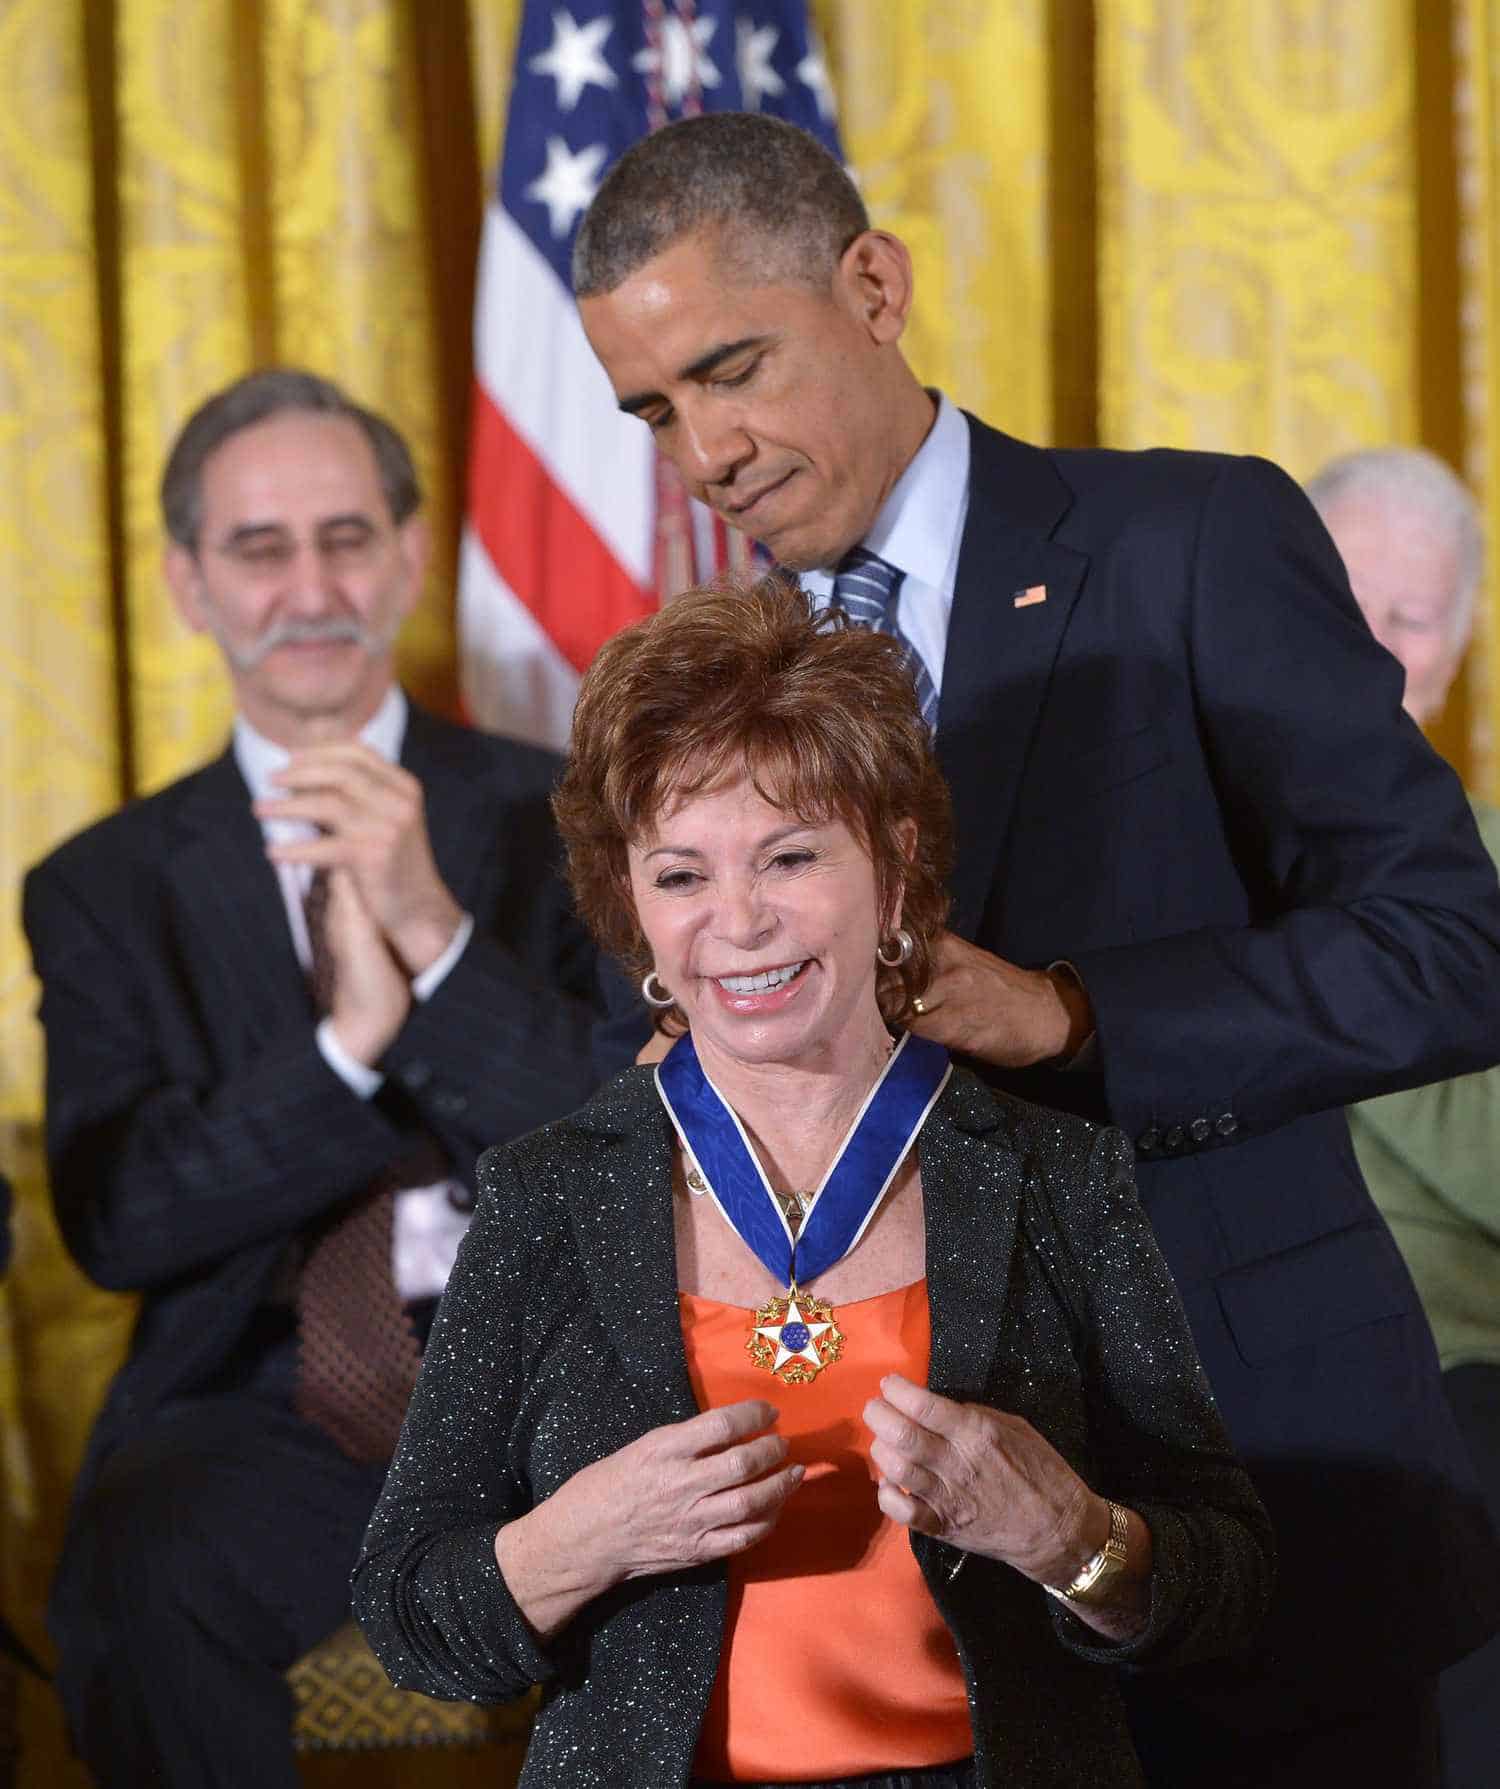 Isabel Allende's awards and achievements